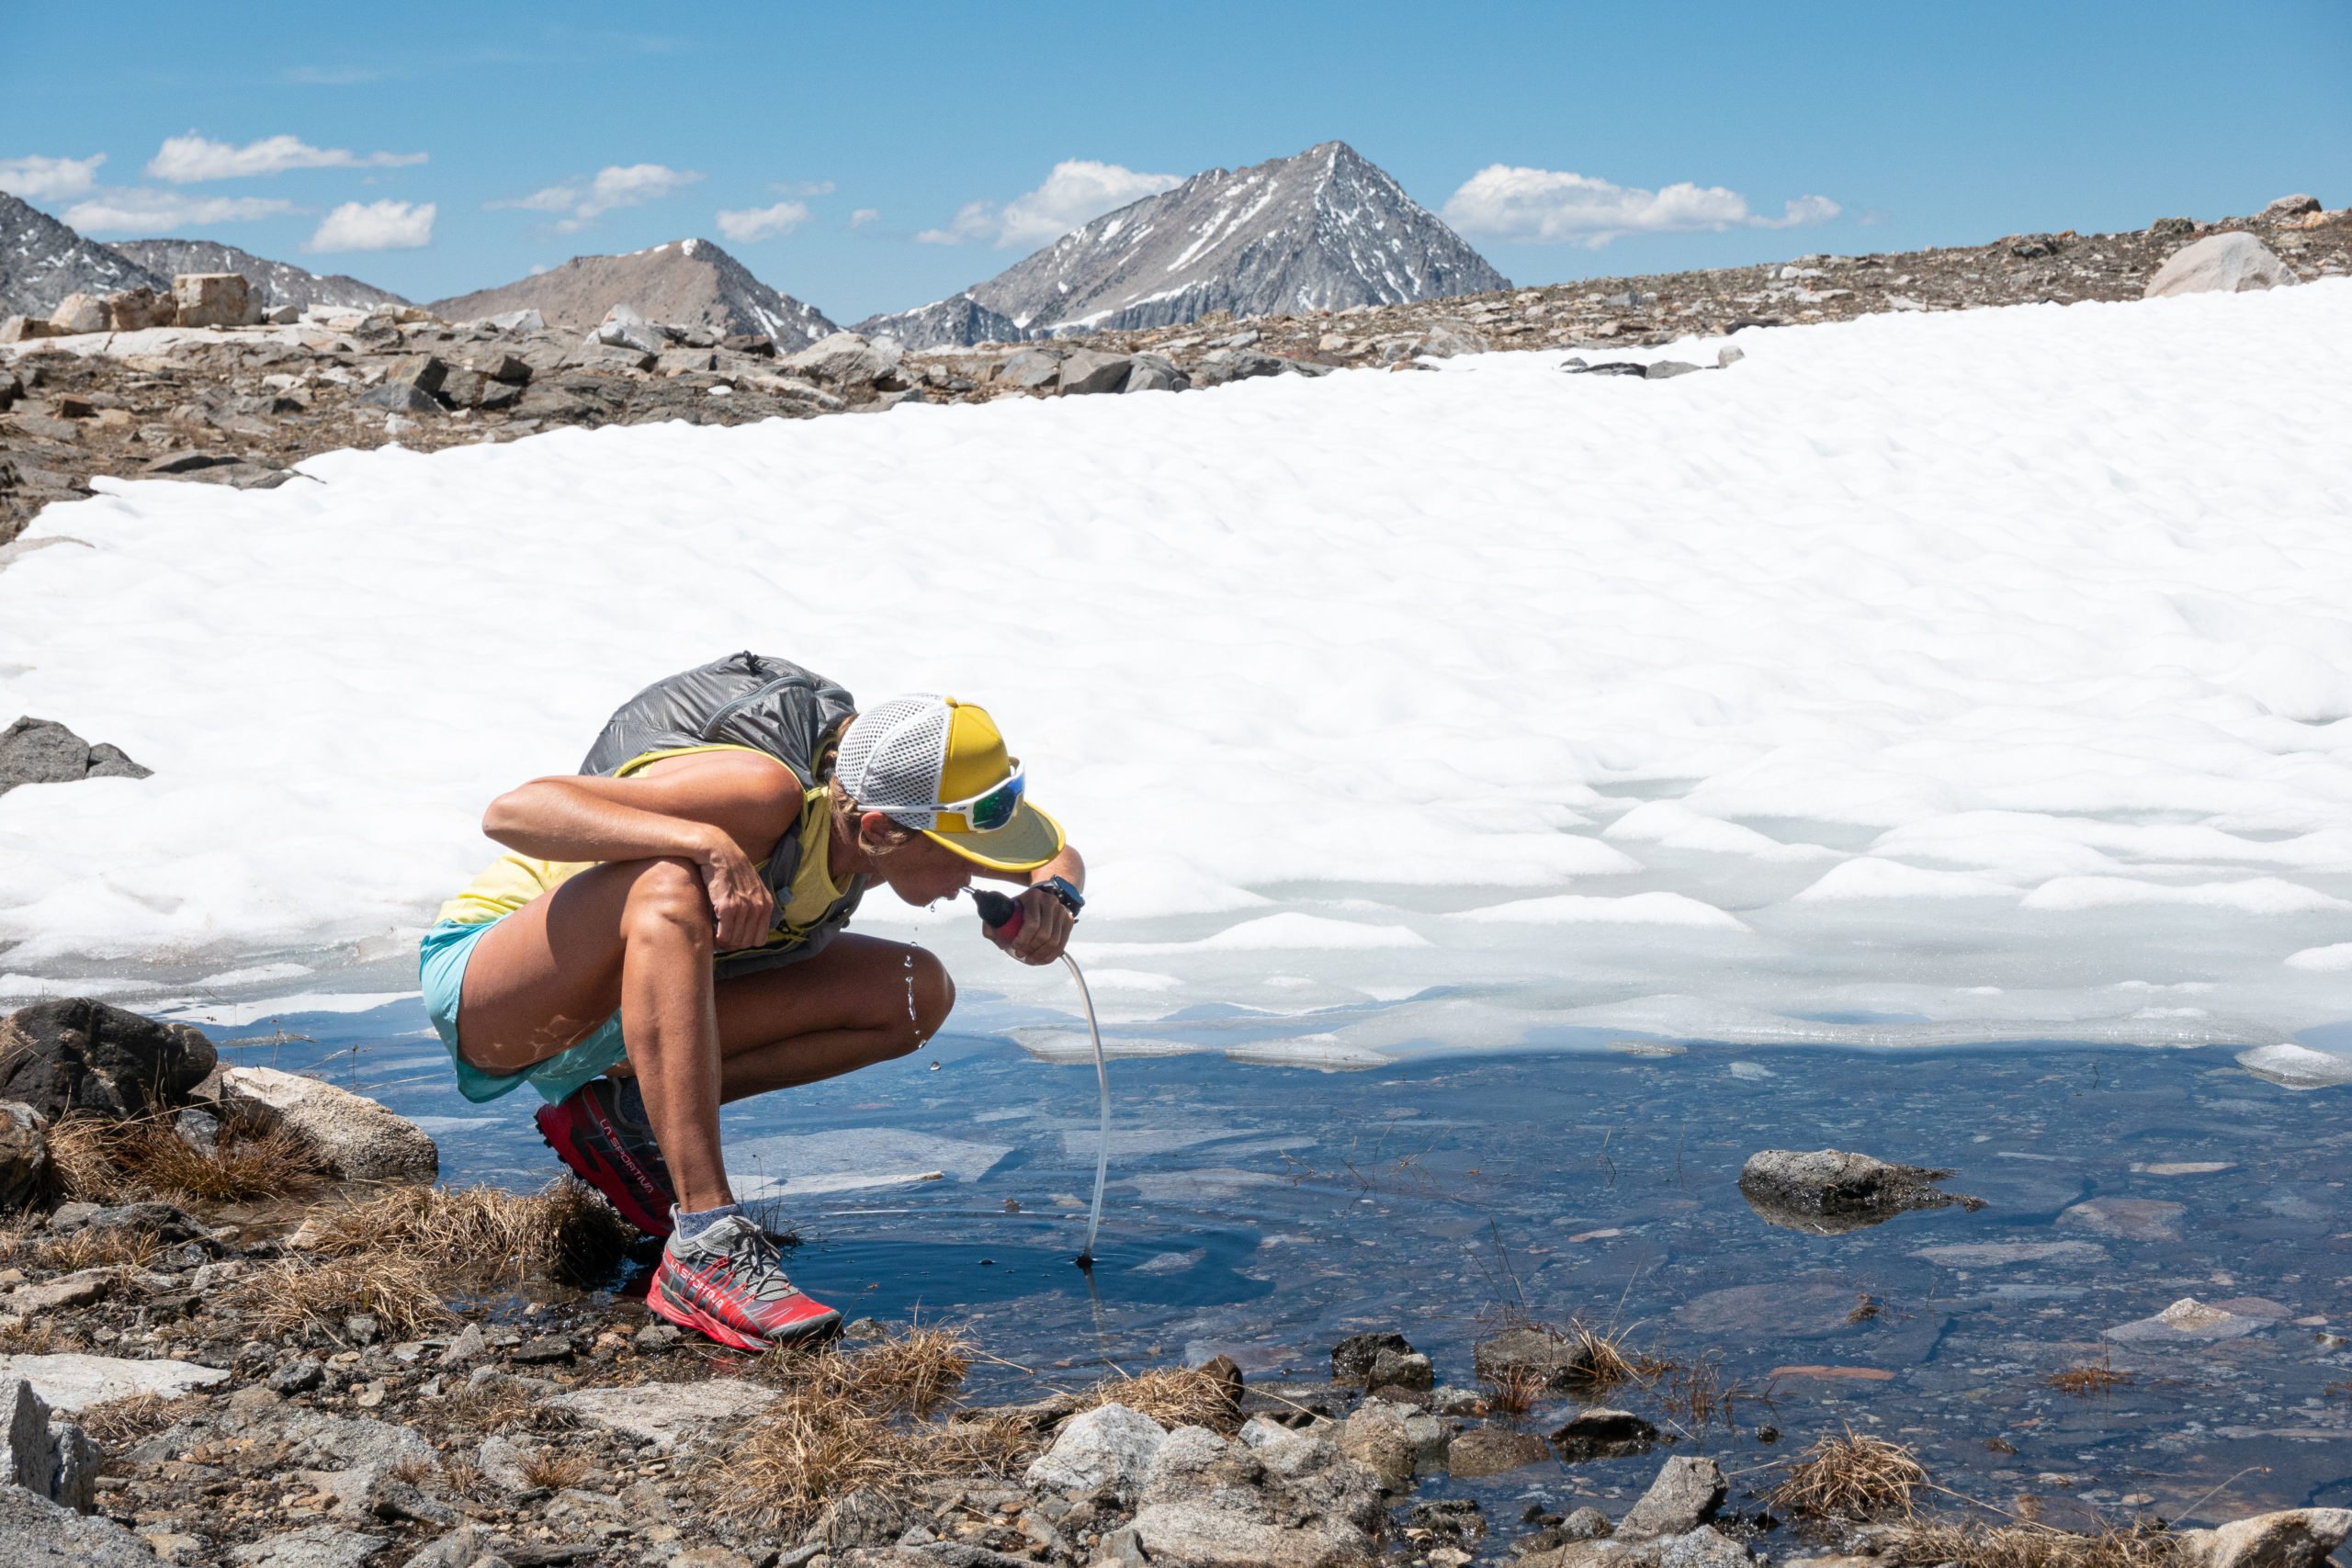 A runner stopped to filter water a small lake while trail running the Taboose Pass Trail to Cardinal Mountain in California's Sierra Nevada